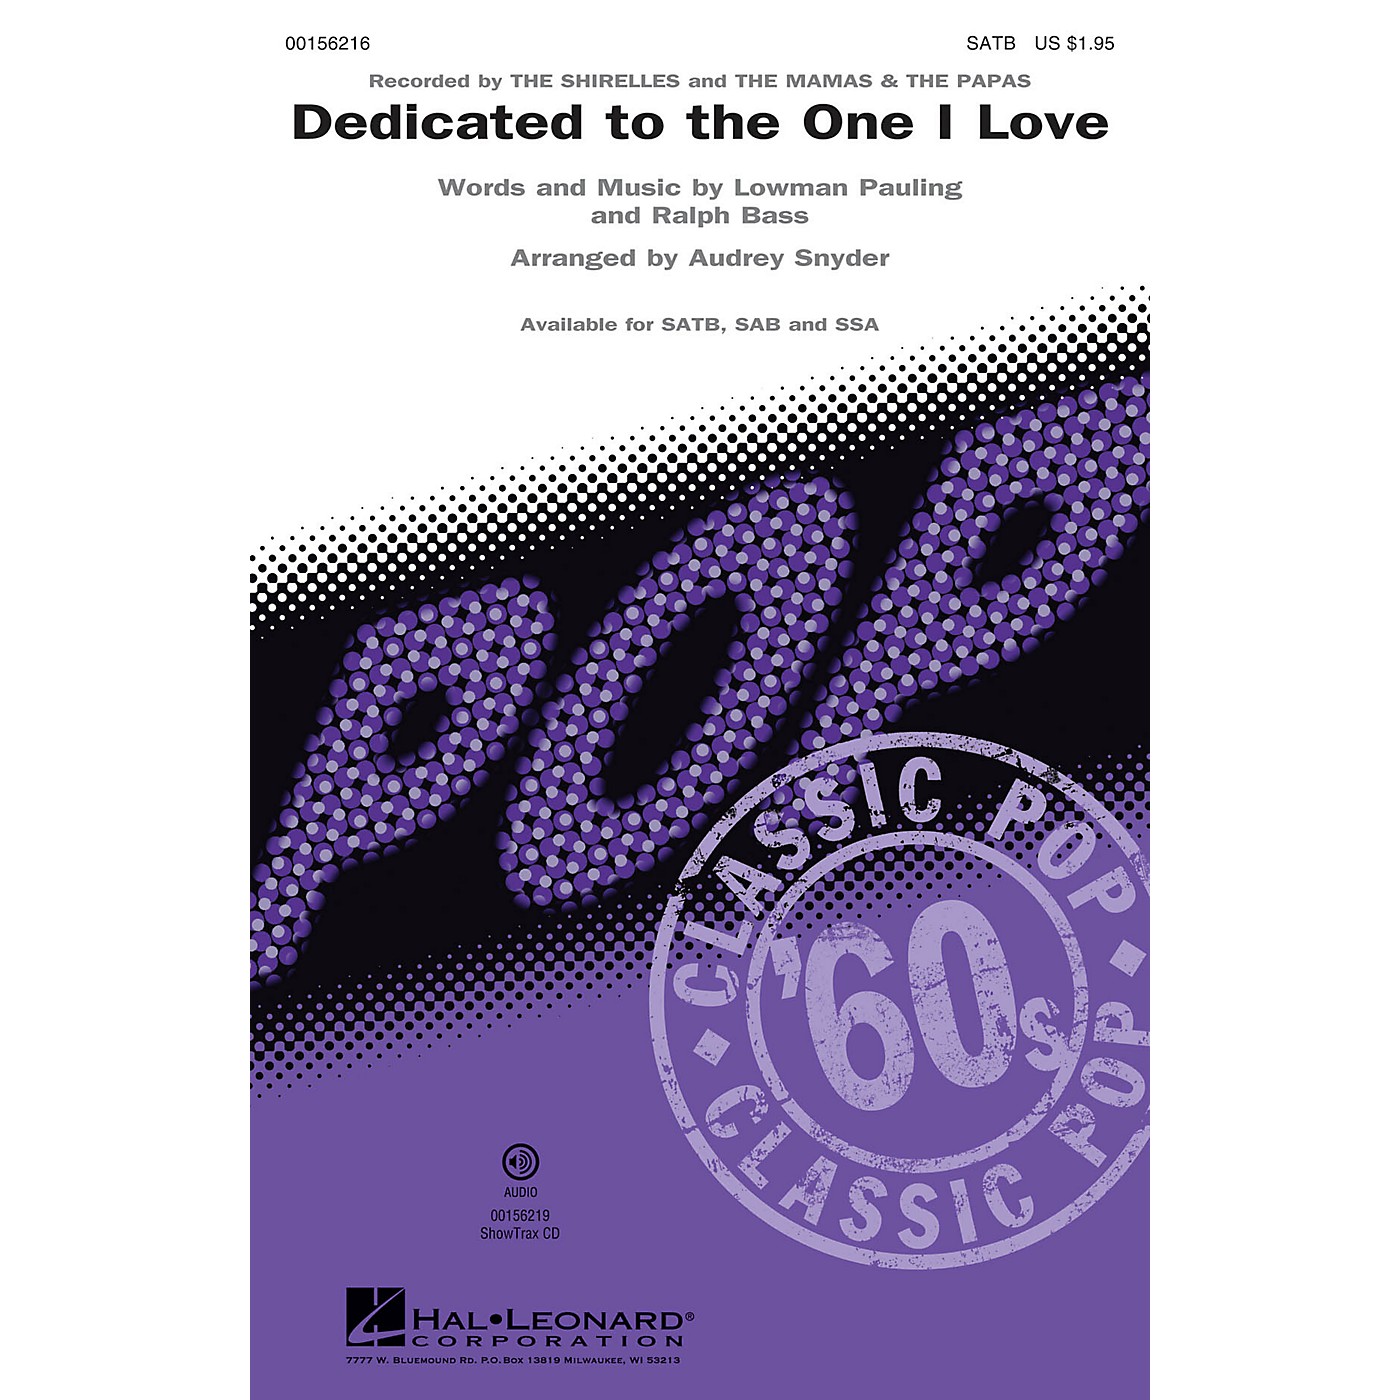 Hal Leonard Dedicated to the One I Love SAB by The Mamas & the Papas and The Shirelles Arranged by Audrey Snyder thumbnail